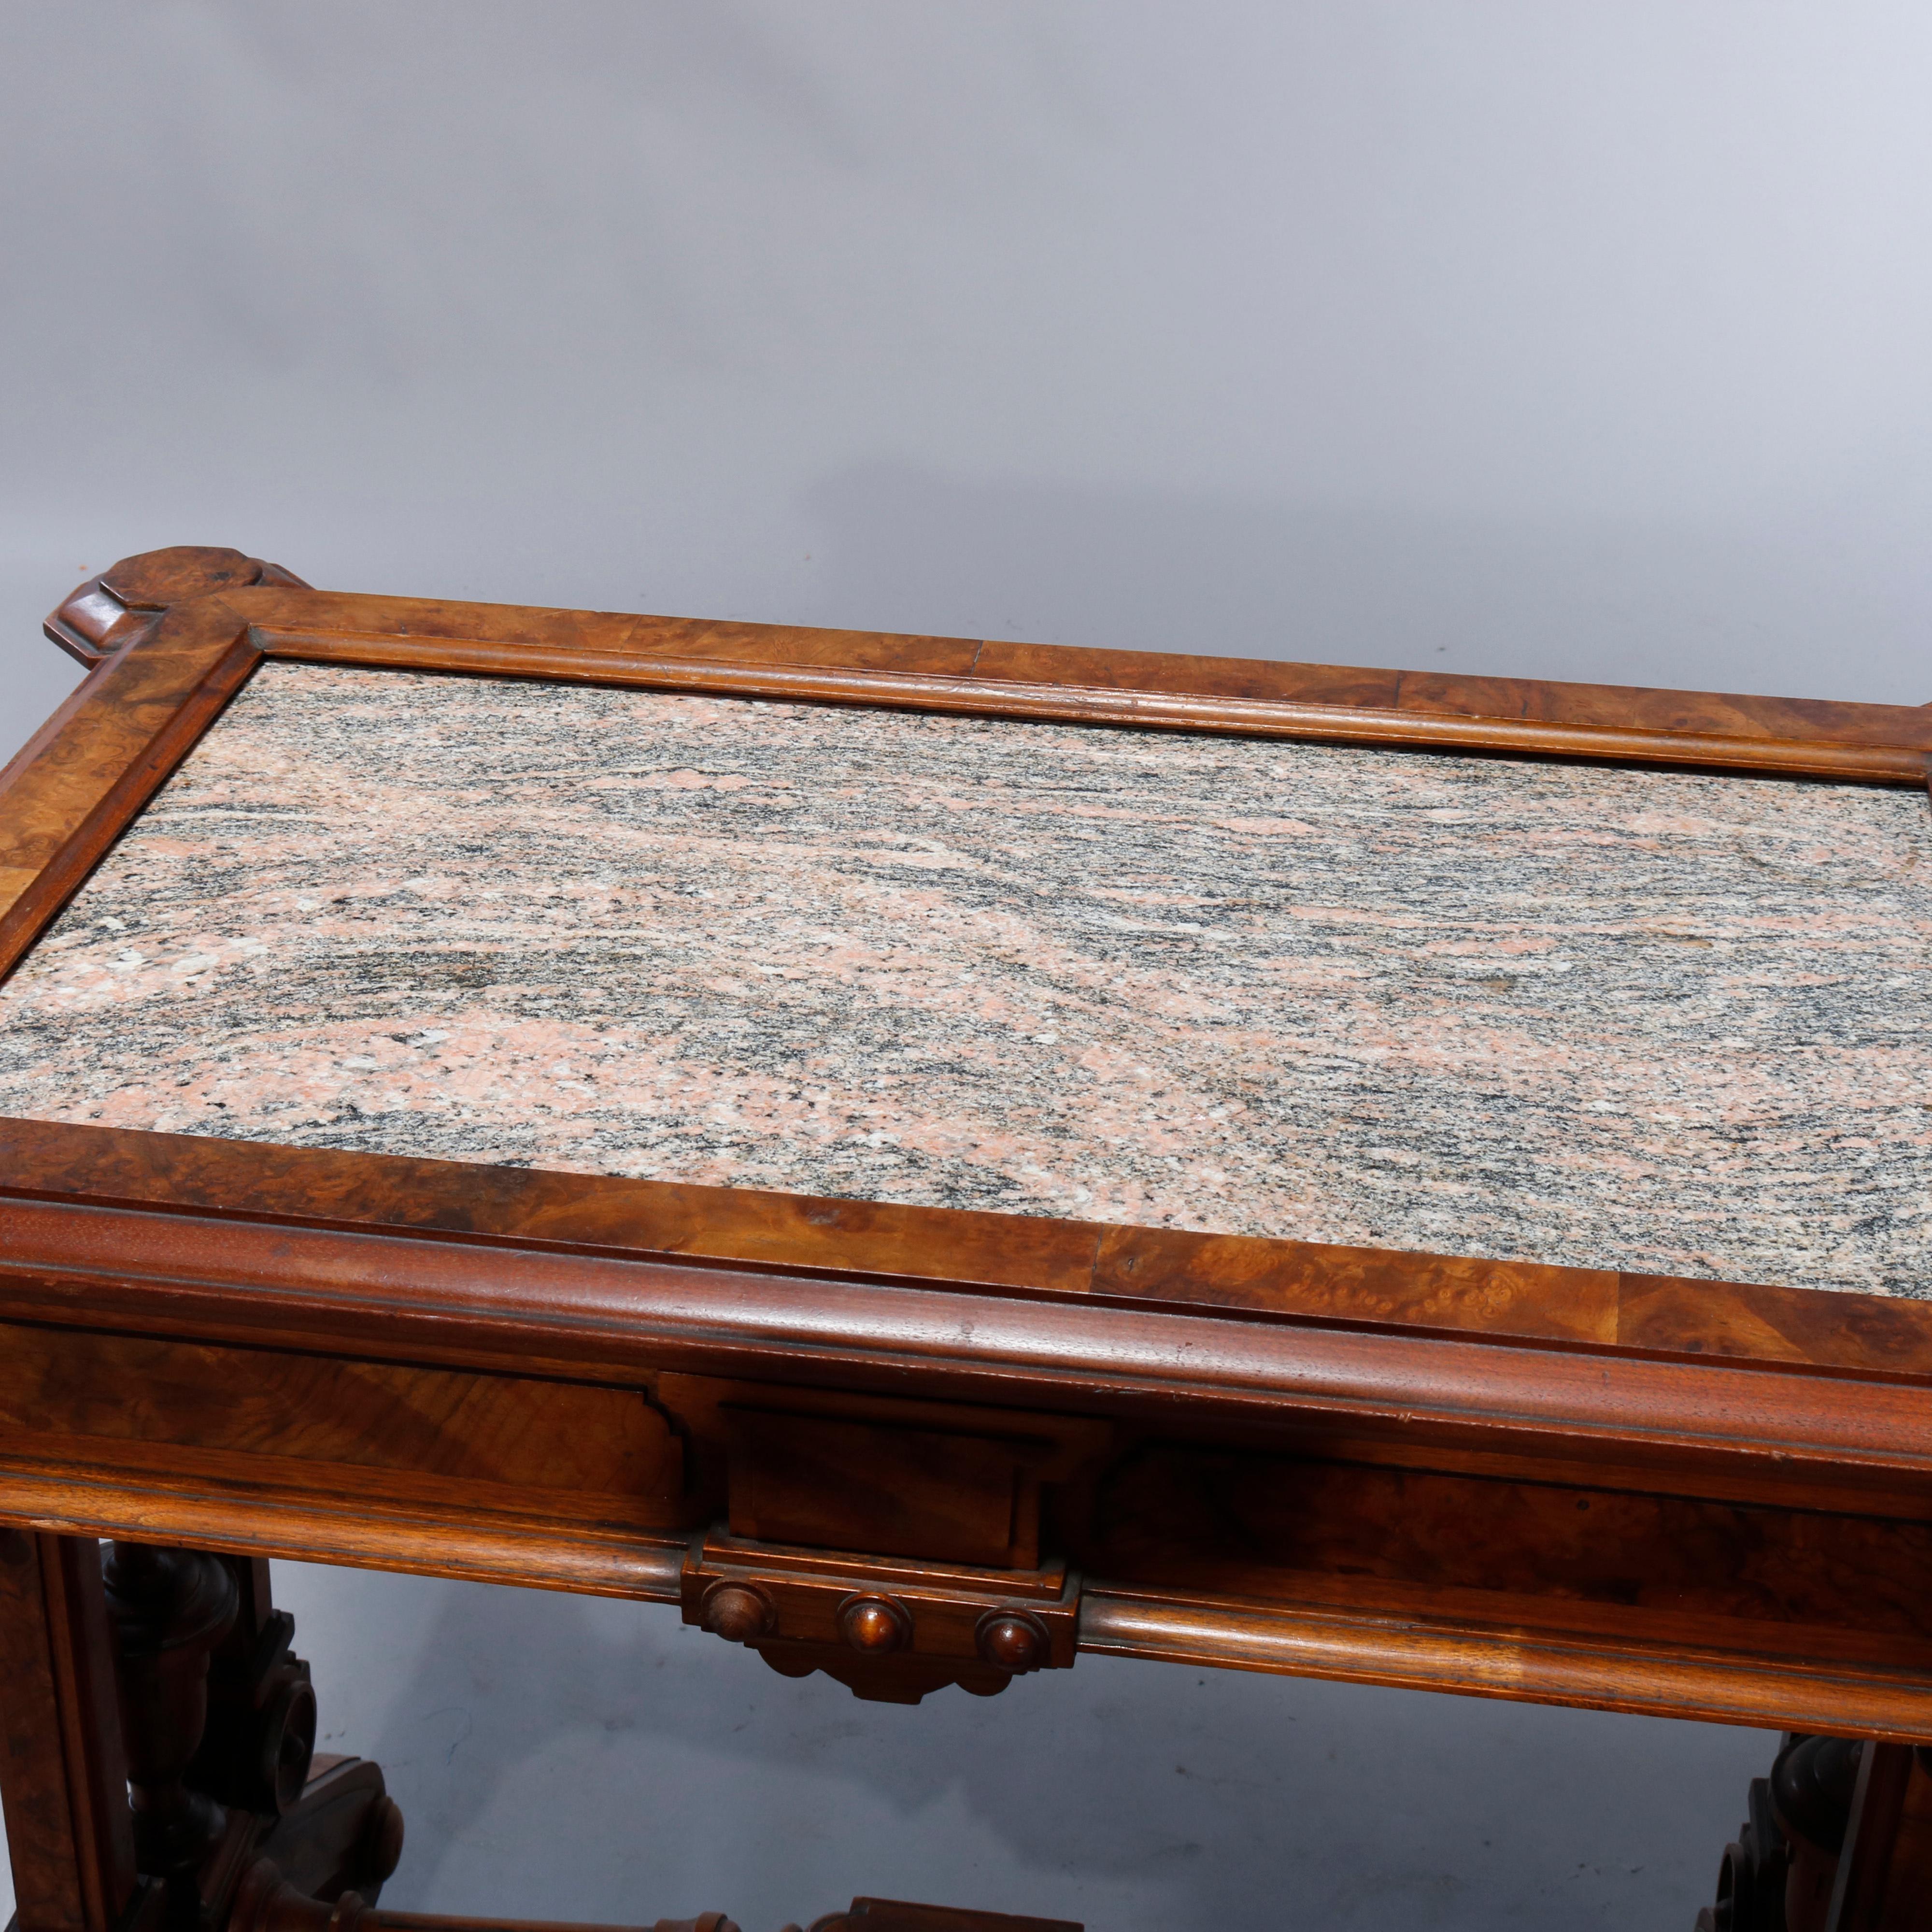 An antique Renaissance Revival parlor table offers picture frame inset rouge marble top over trestle walnut base having burl insets, drop finials and scroll form legs, c1890.

Measures: 29.5